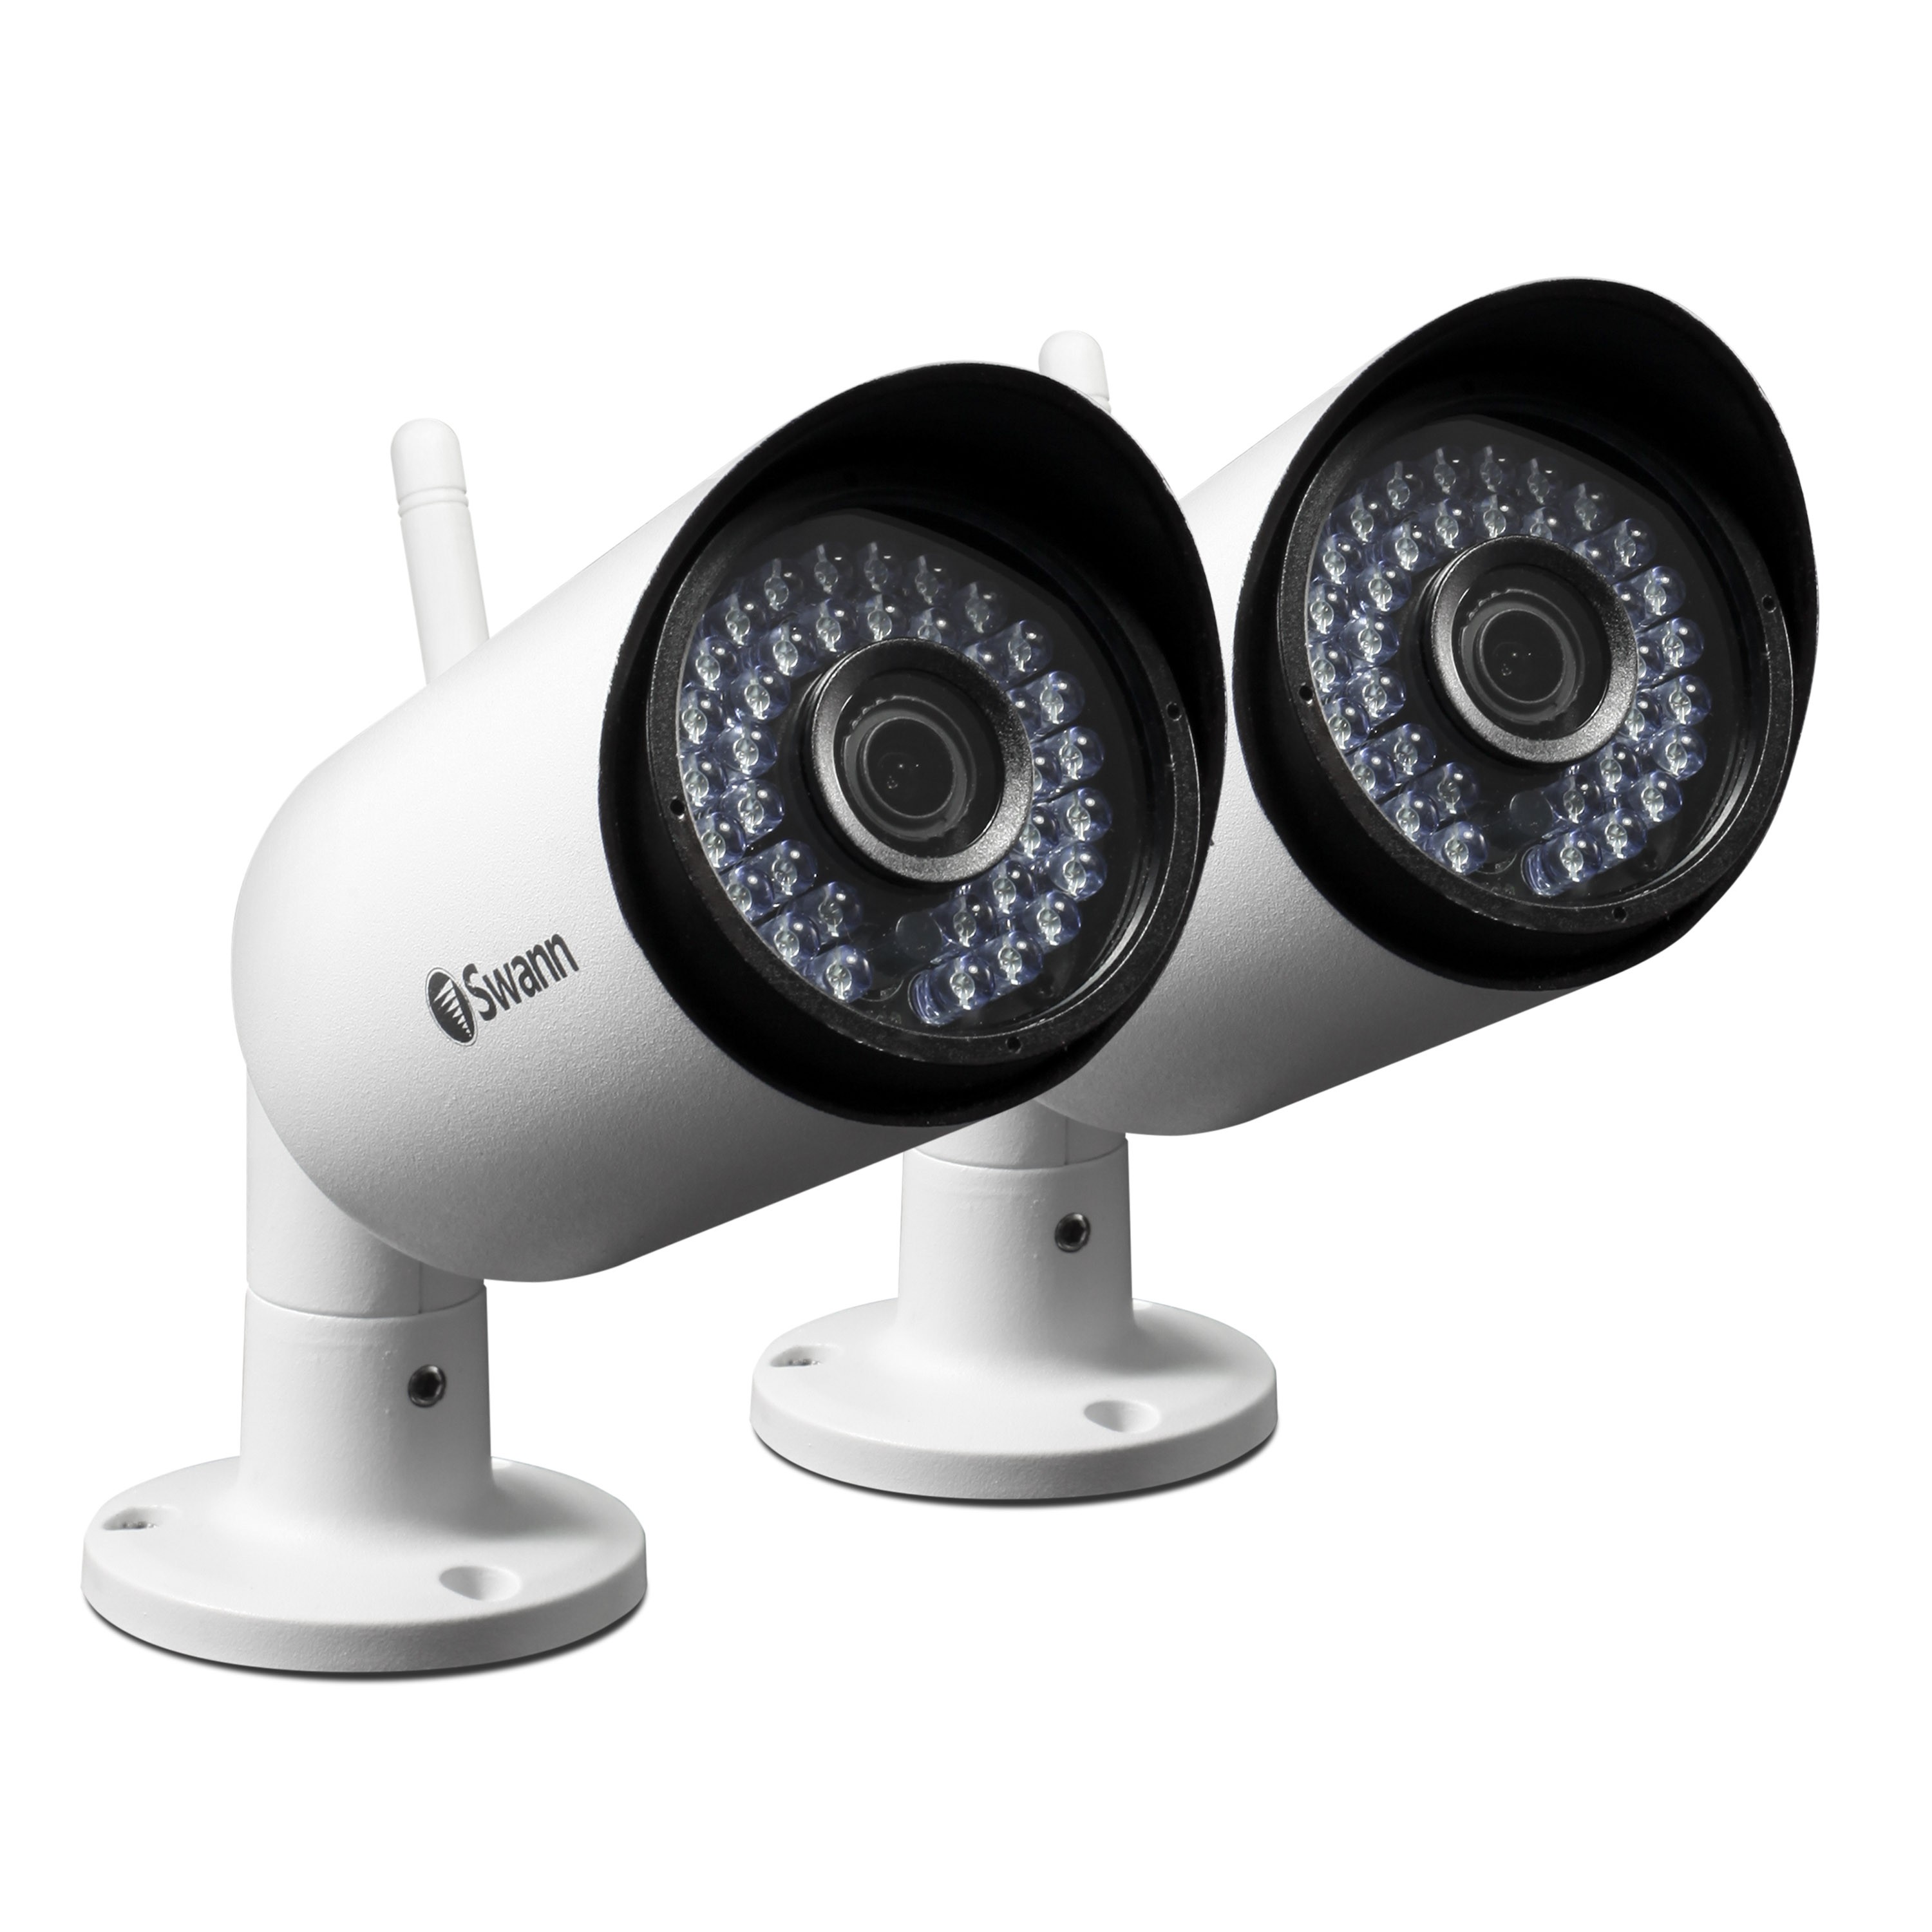 NVW-485 Wi-Fi HD Security Cameras - 2 x 